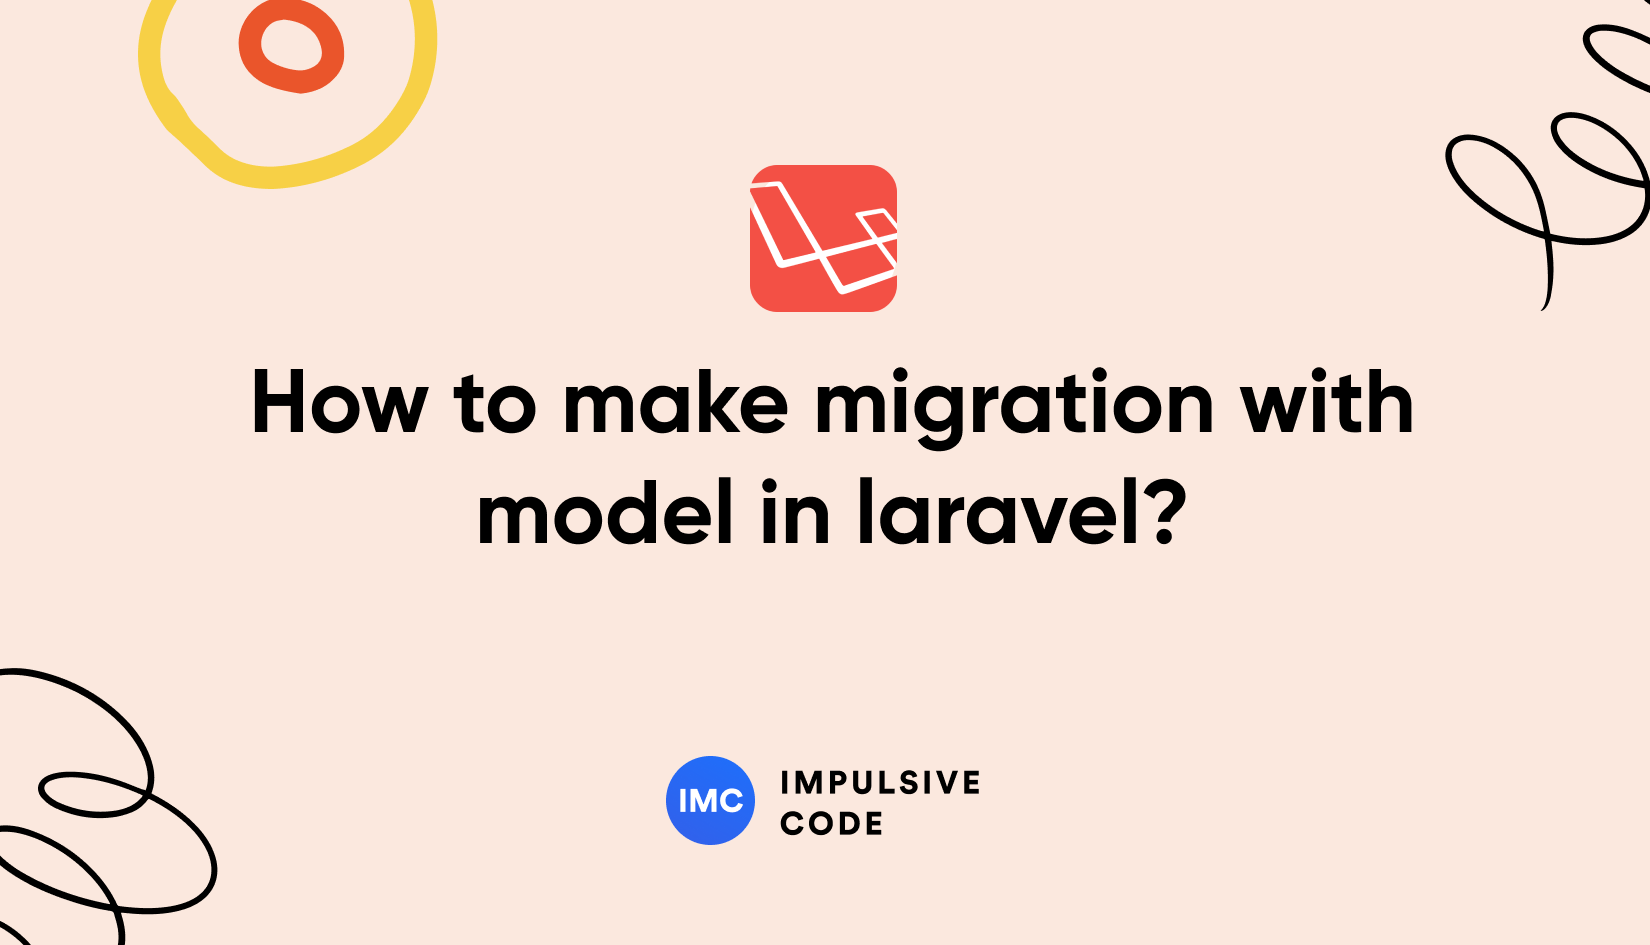 How to make migration with model in laravel?